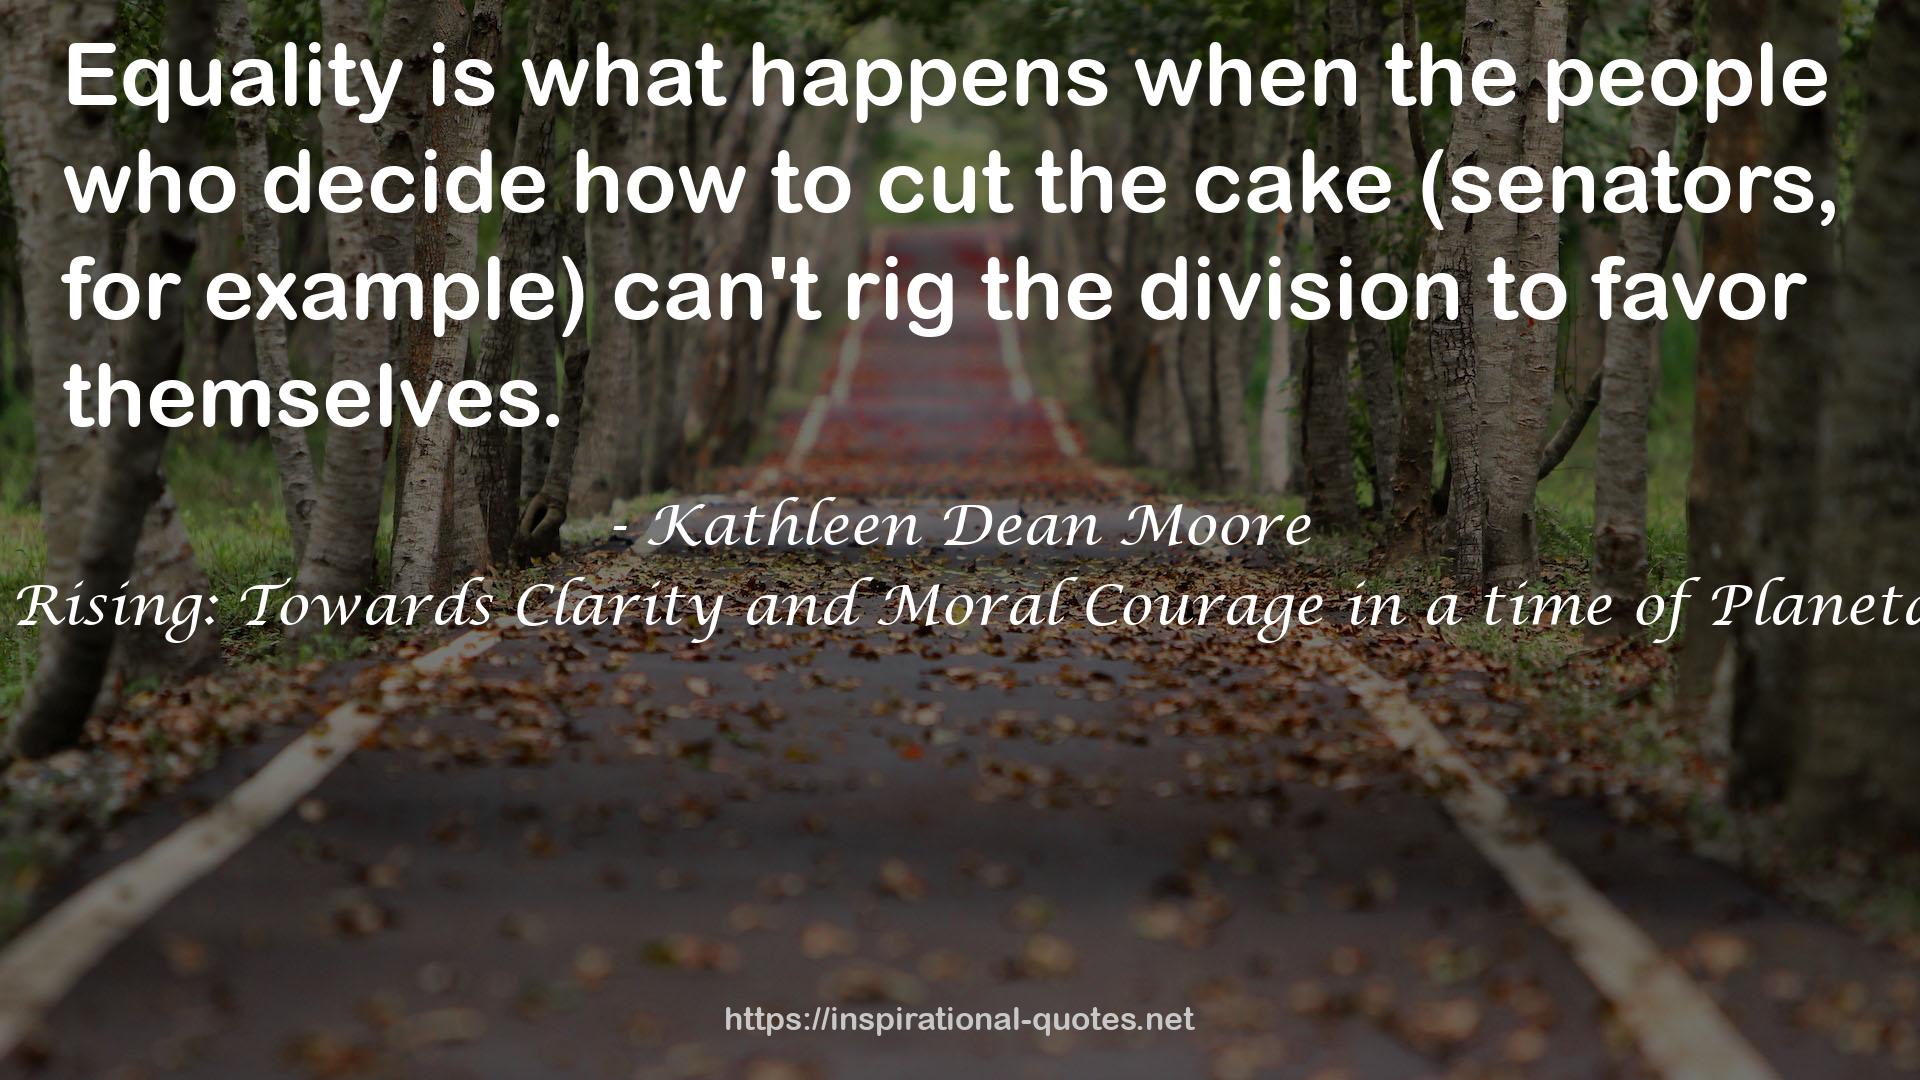 Great Tide Rising: Towards Clarity and Moral Courage in a time of Planetary Change QUOTES